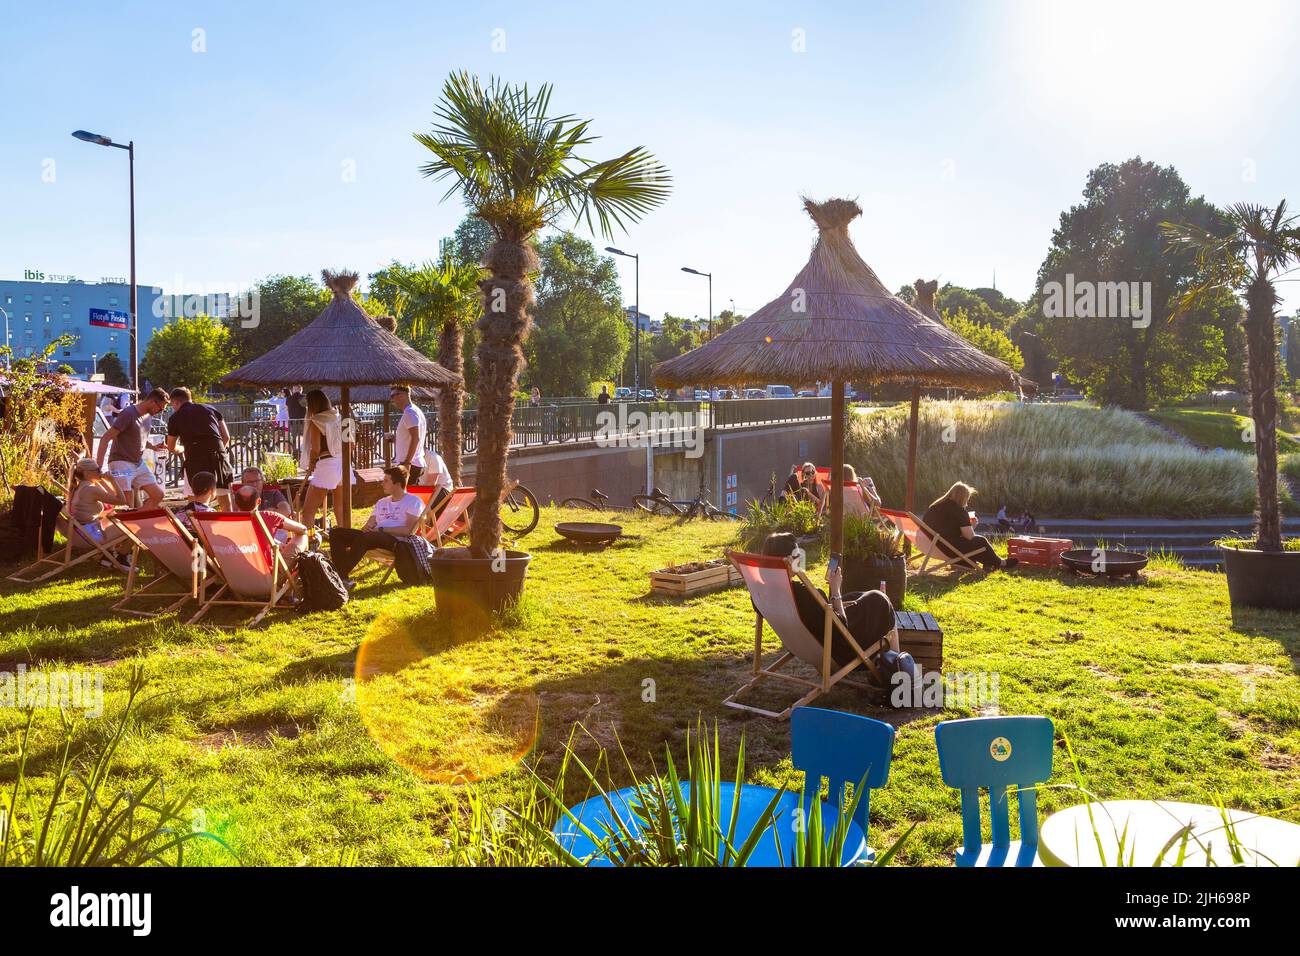 People relaxing on deck chairs on a sunny day at Miami Wars food market and bar along the Vistula Riverside, Solec, Warsaw, Poland Stock Photo